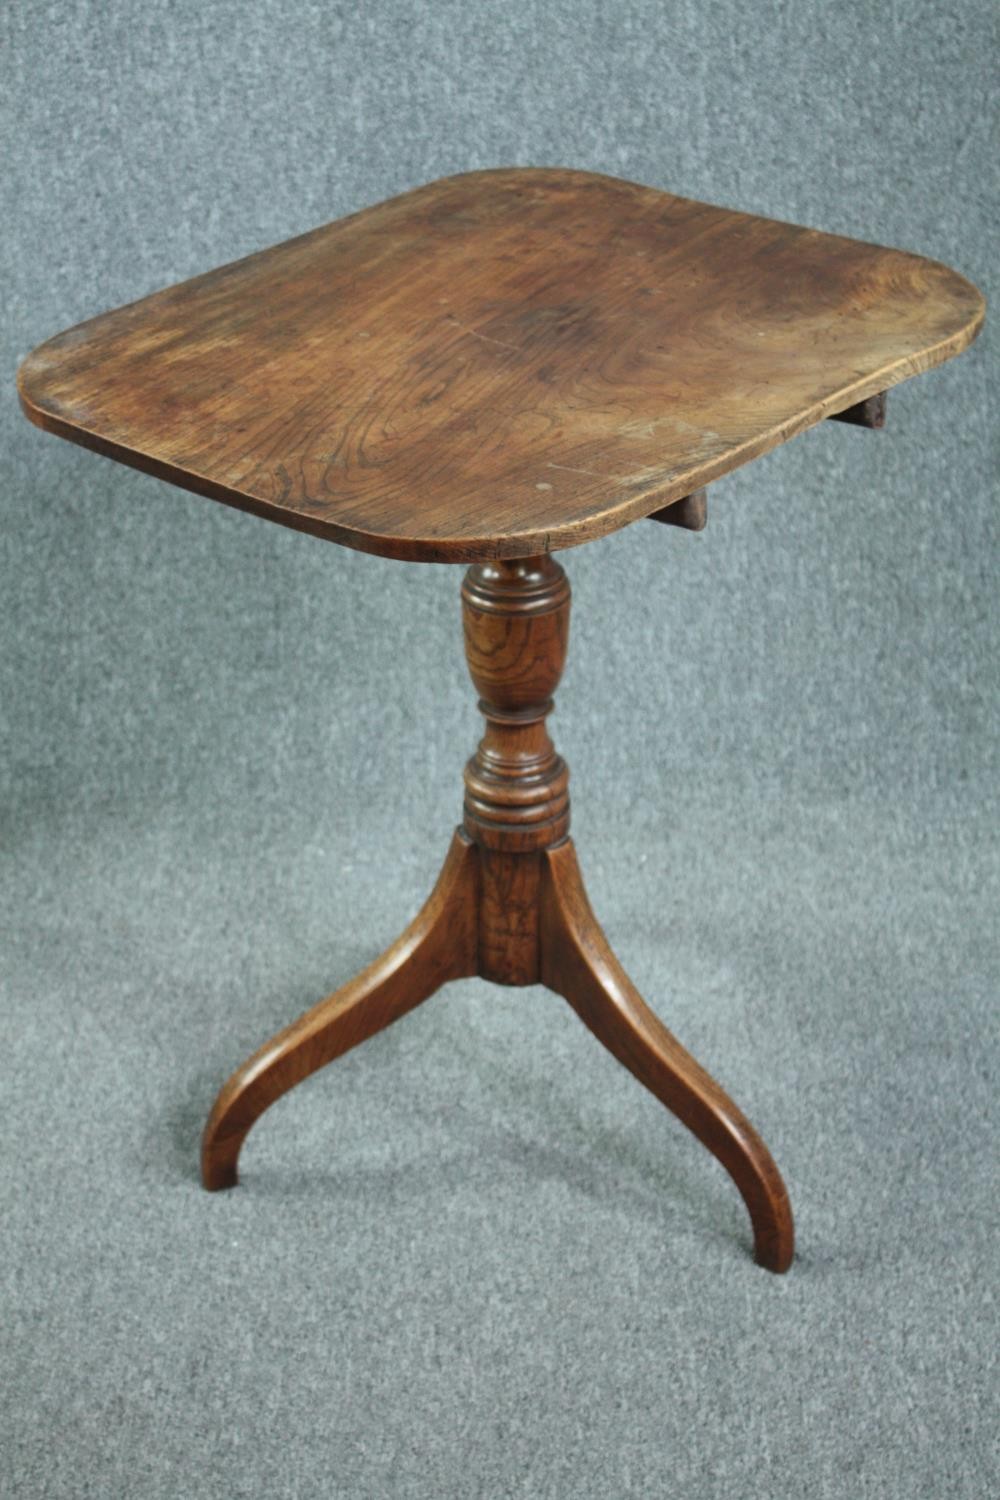 Occasional table, early 19th century mahogany with tilt top action. H.76 W.64 D.54cm. - Image 2 of 5